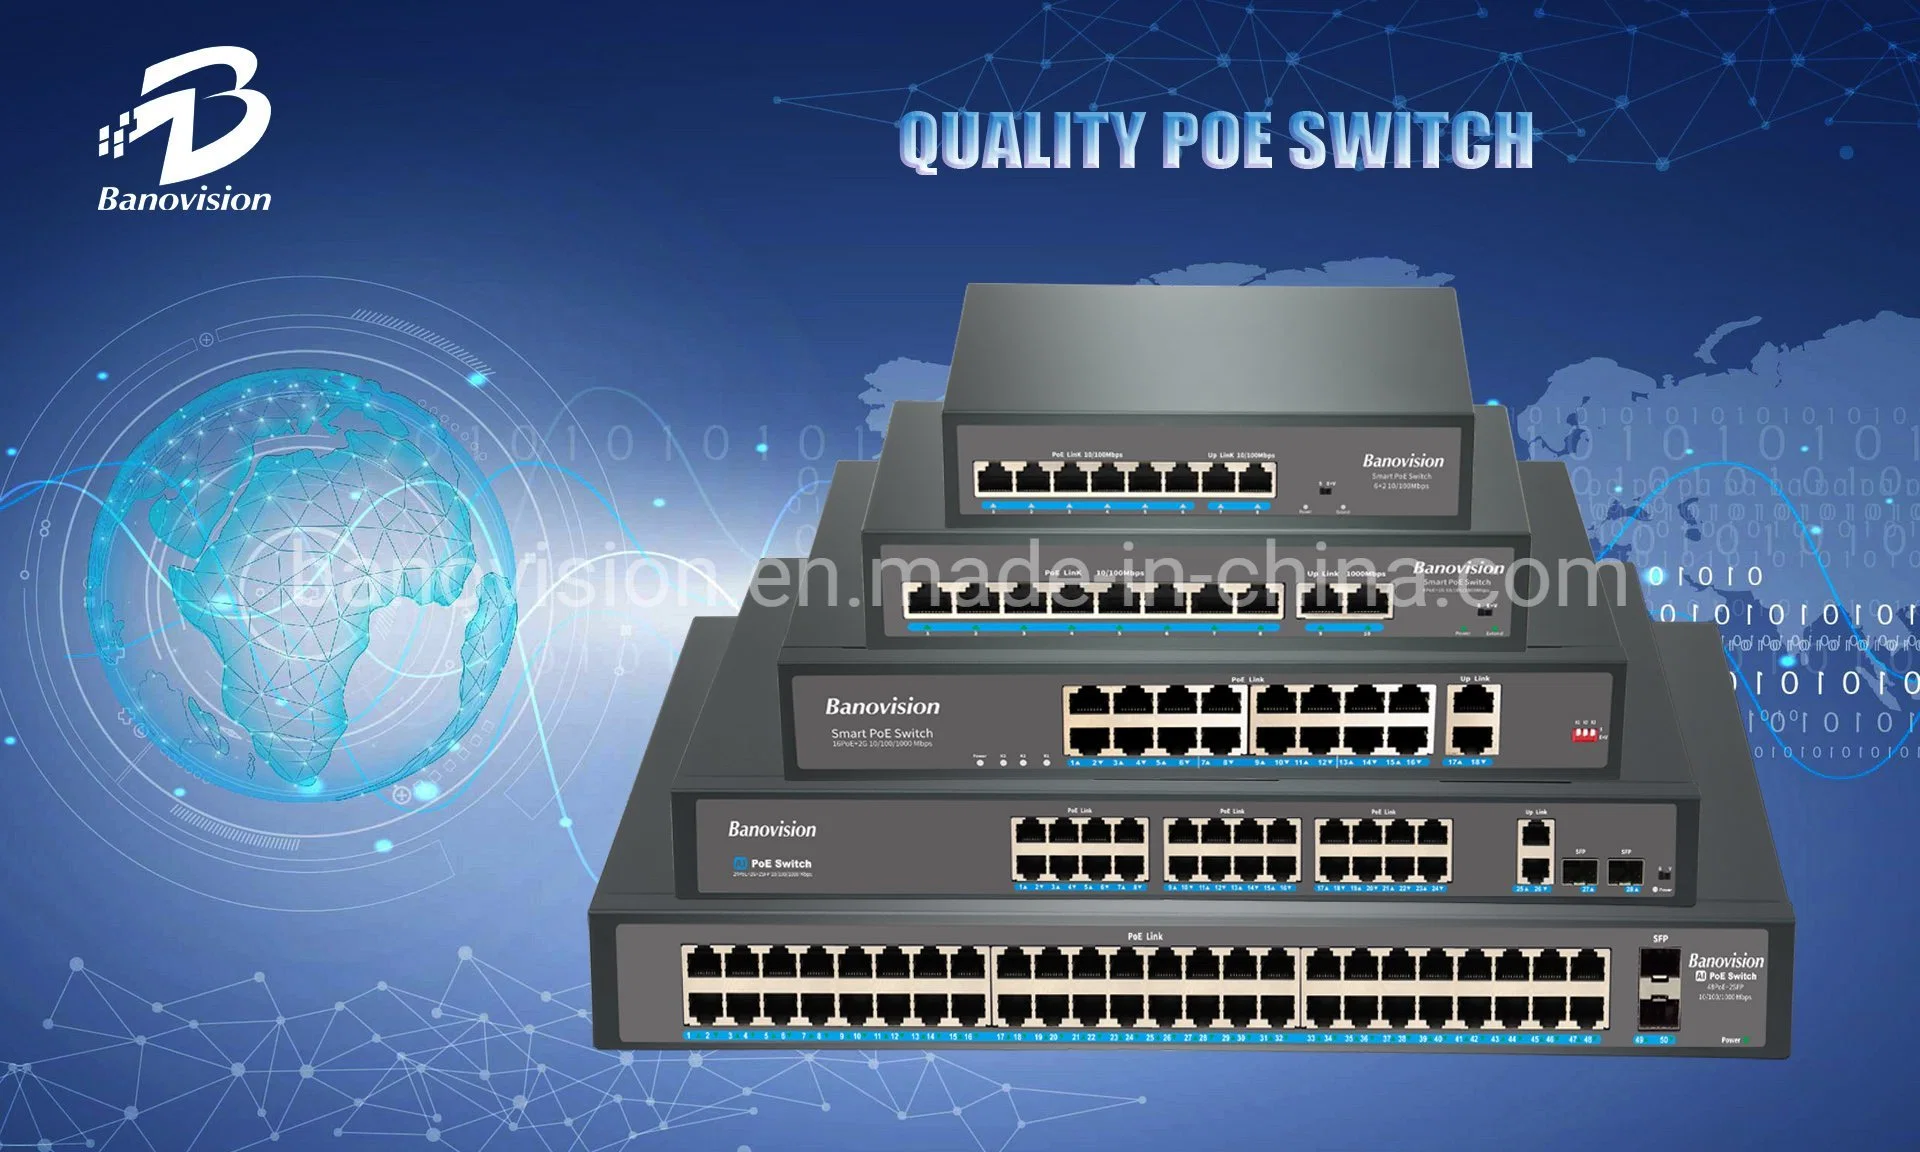 Banovision 48 Port Ai Watch Dog Gigabit Ethernet Poe Switch with 2 SFP Port, Unmanaged 48 Port Poe+ Network Switch, Rackmout